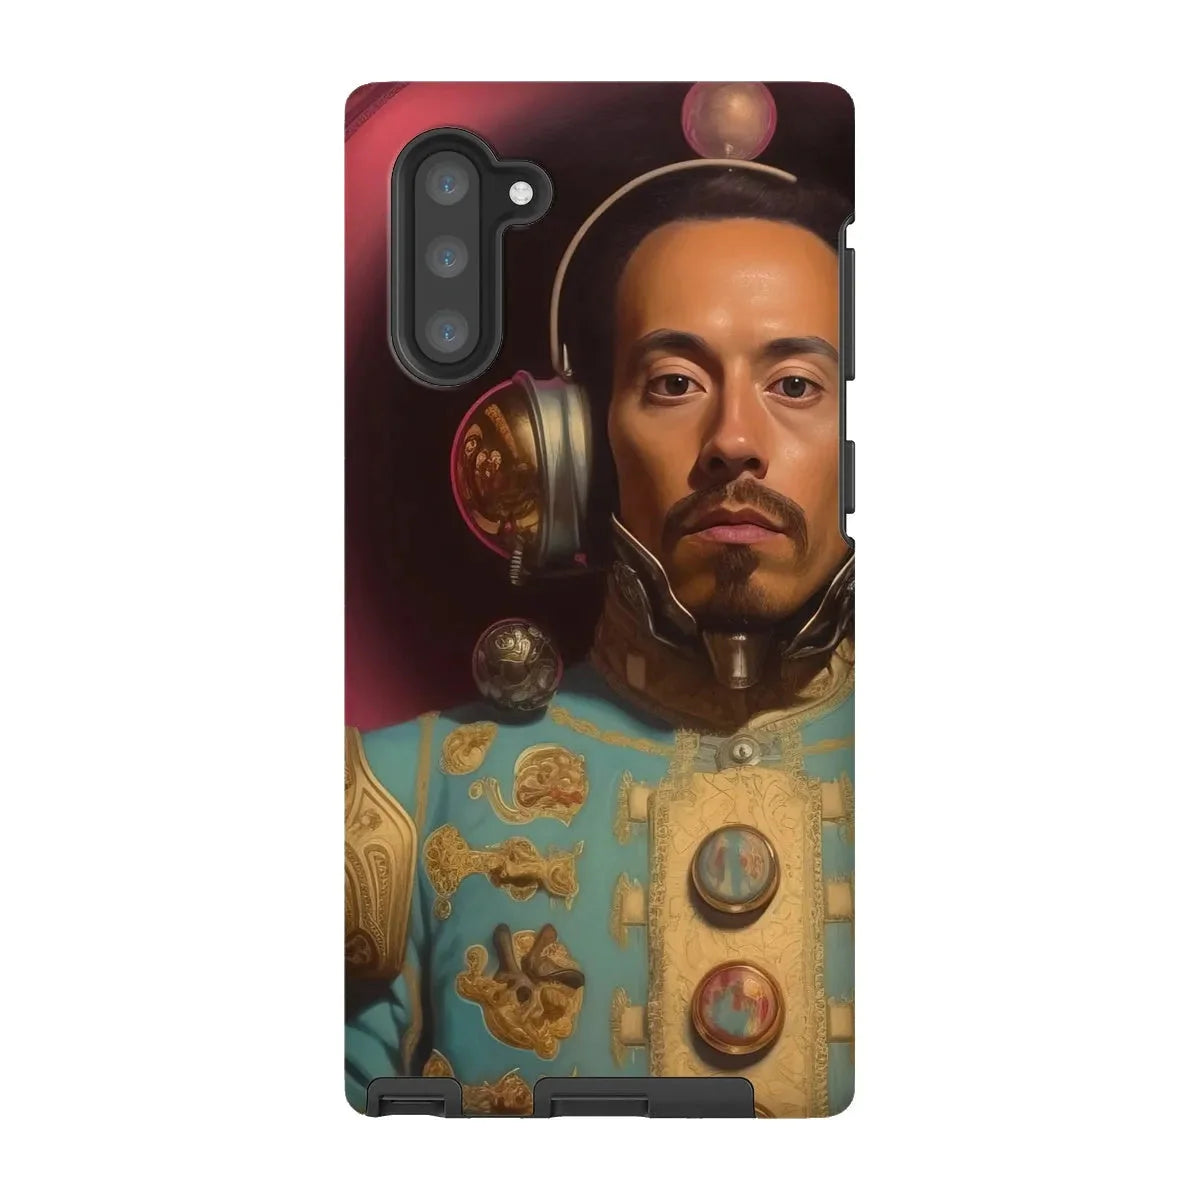 Armando The Gay Astronaut - Queercore Aesthetic Phone Case - Samsung Galaxy Note 10 / Matte - Mobile Phone Cases